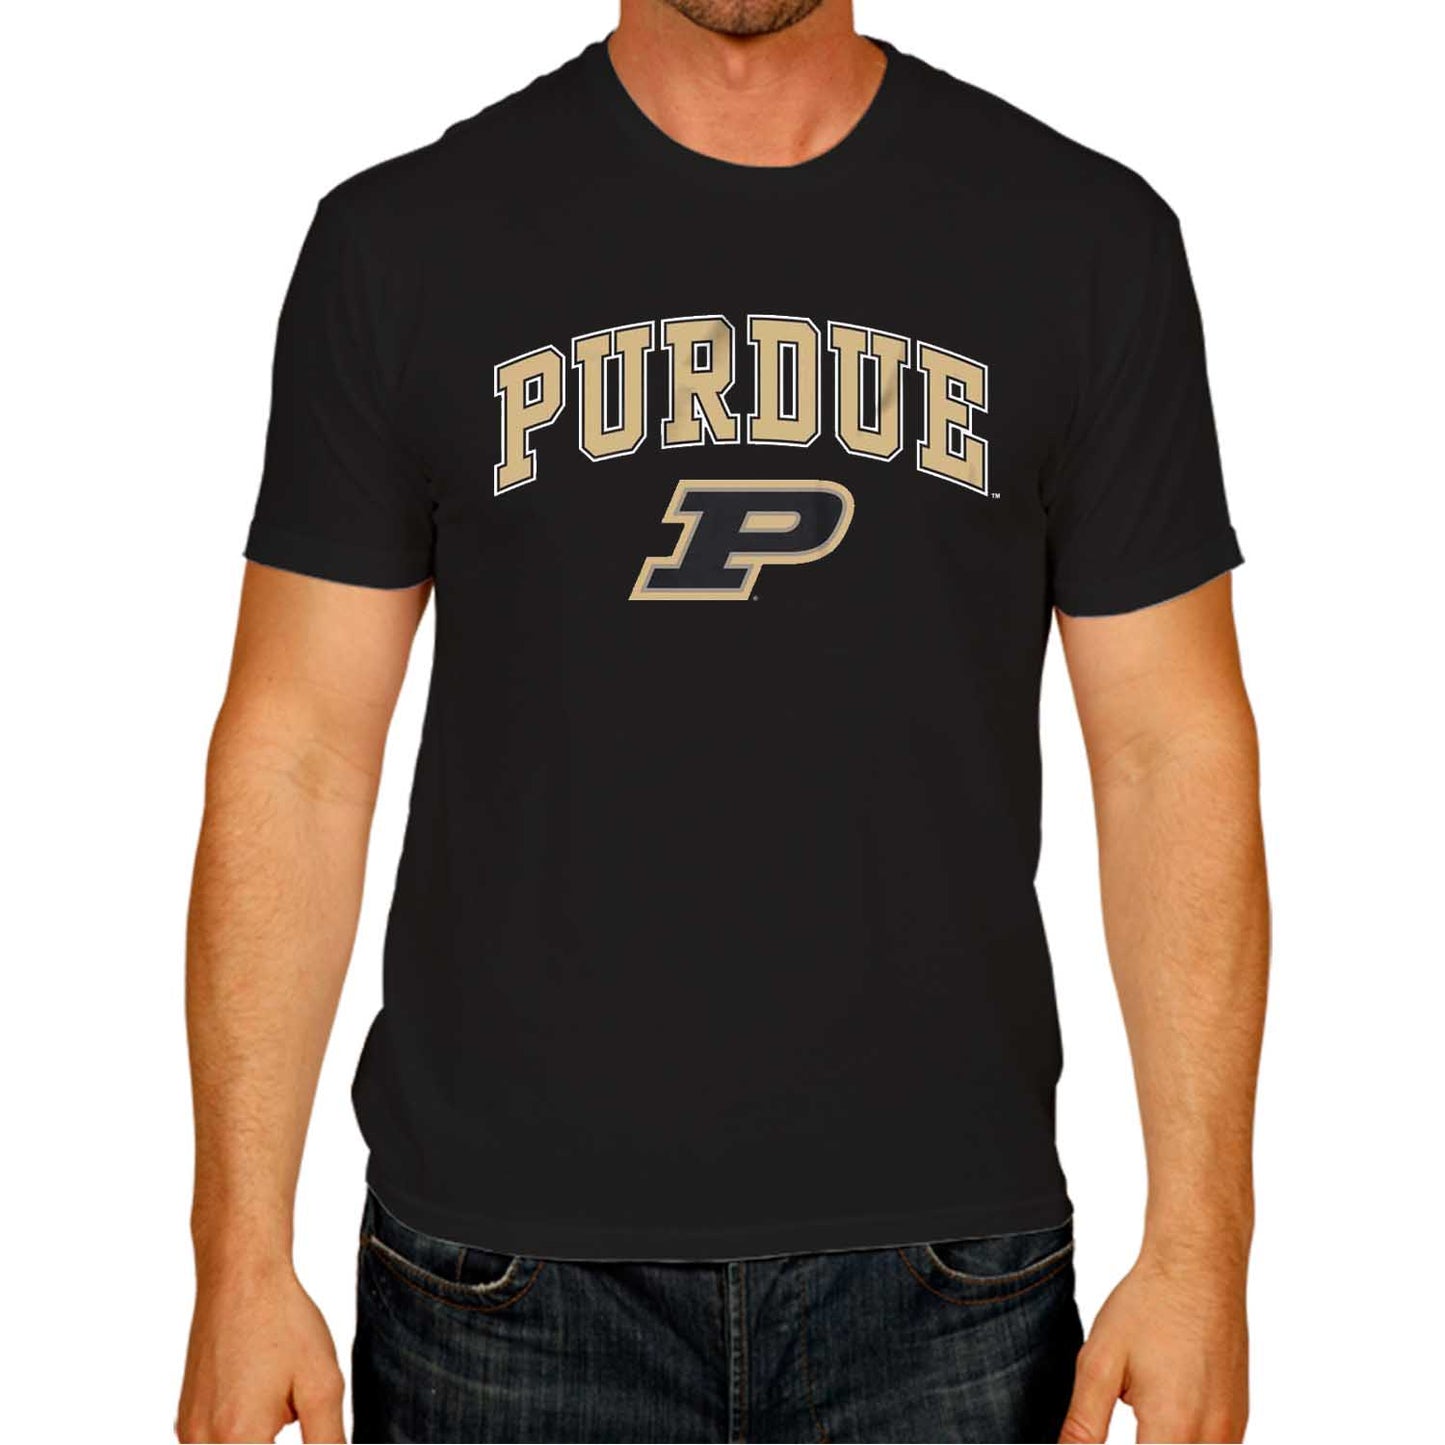 Purdue Boilermakers NCAA Adult Gameday Cotton T-Shirt - Black